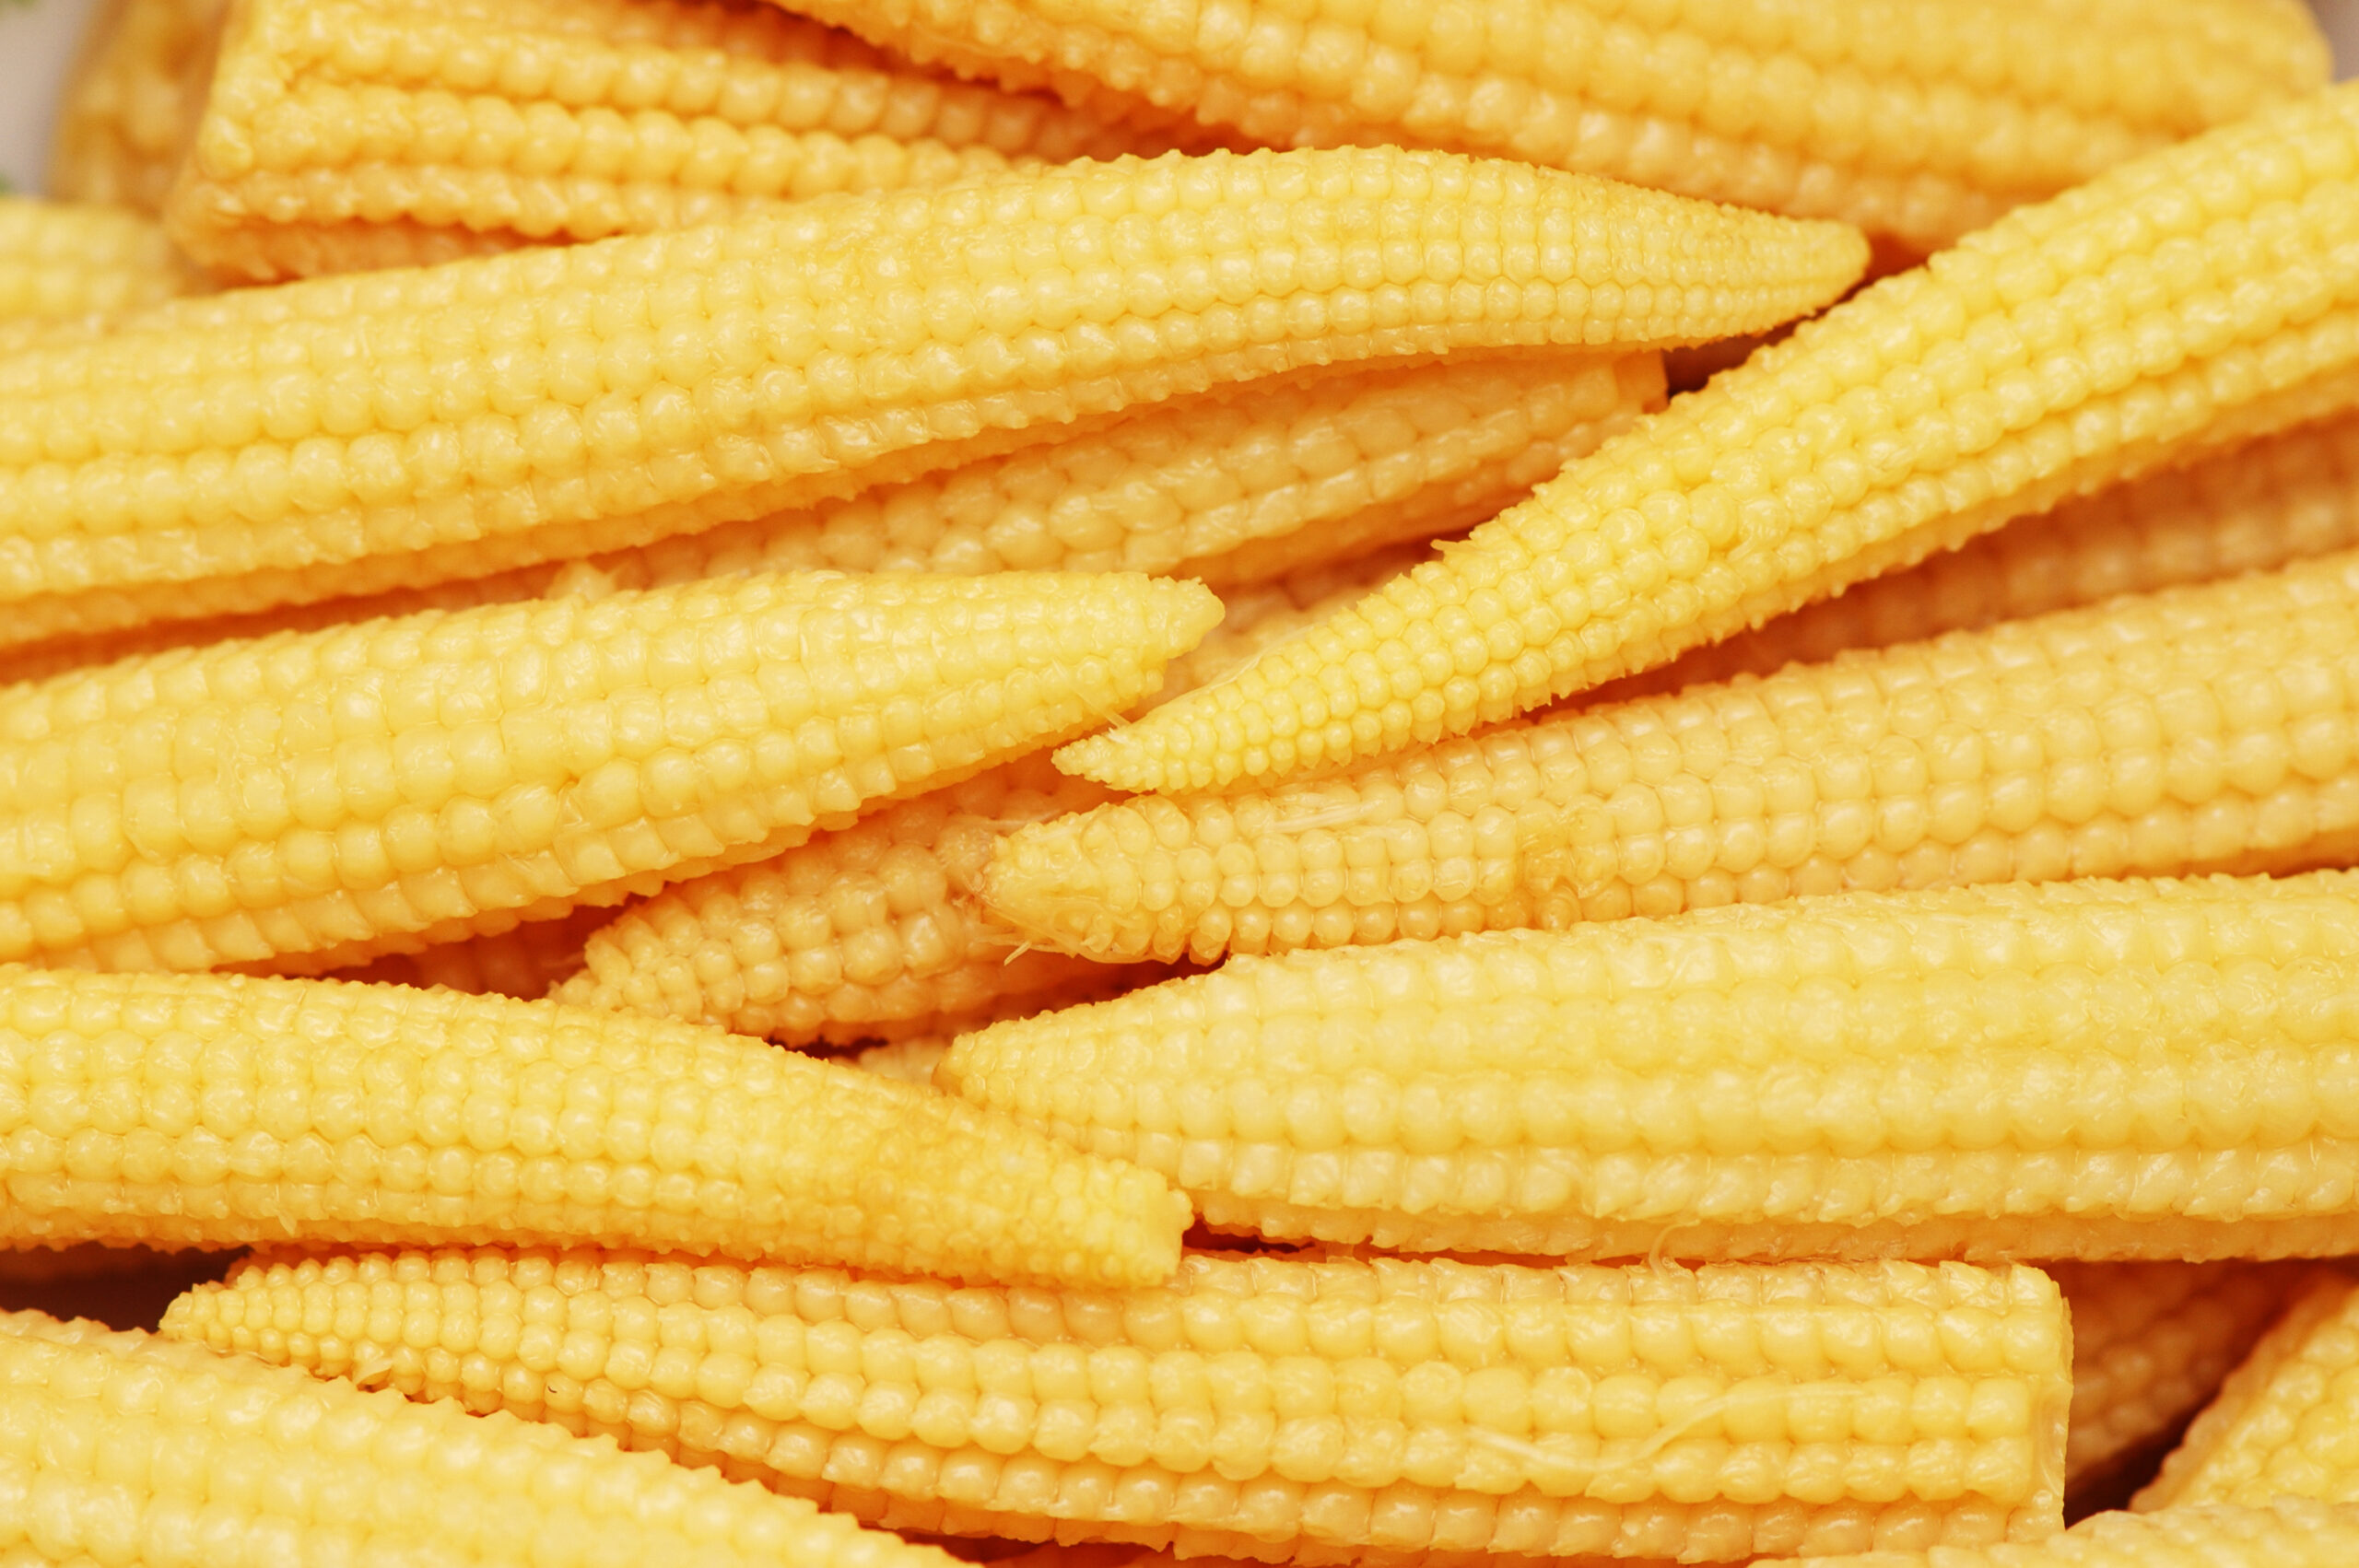 Baby corn cobs arranged as a background